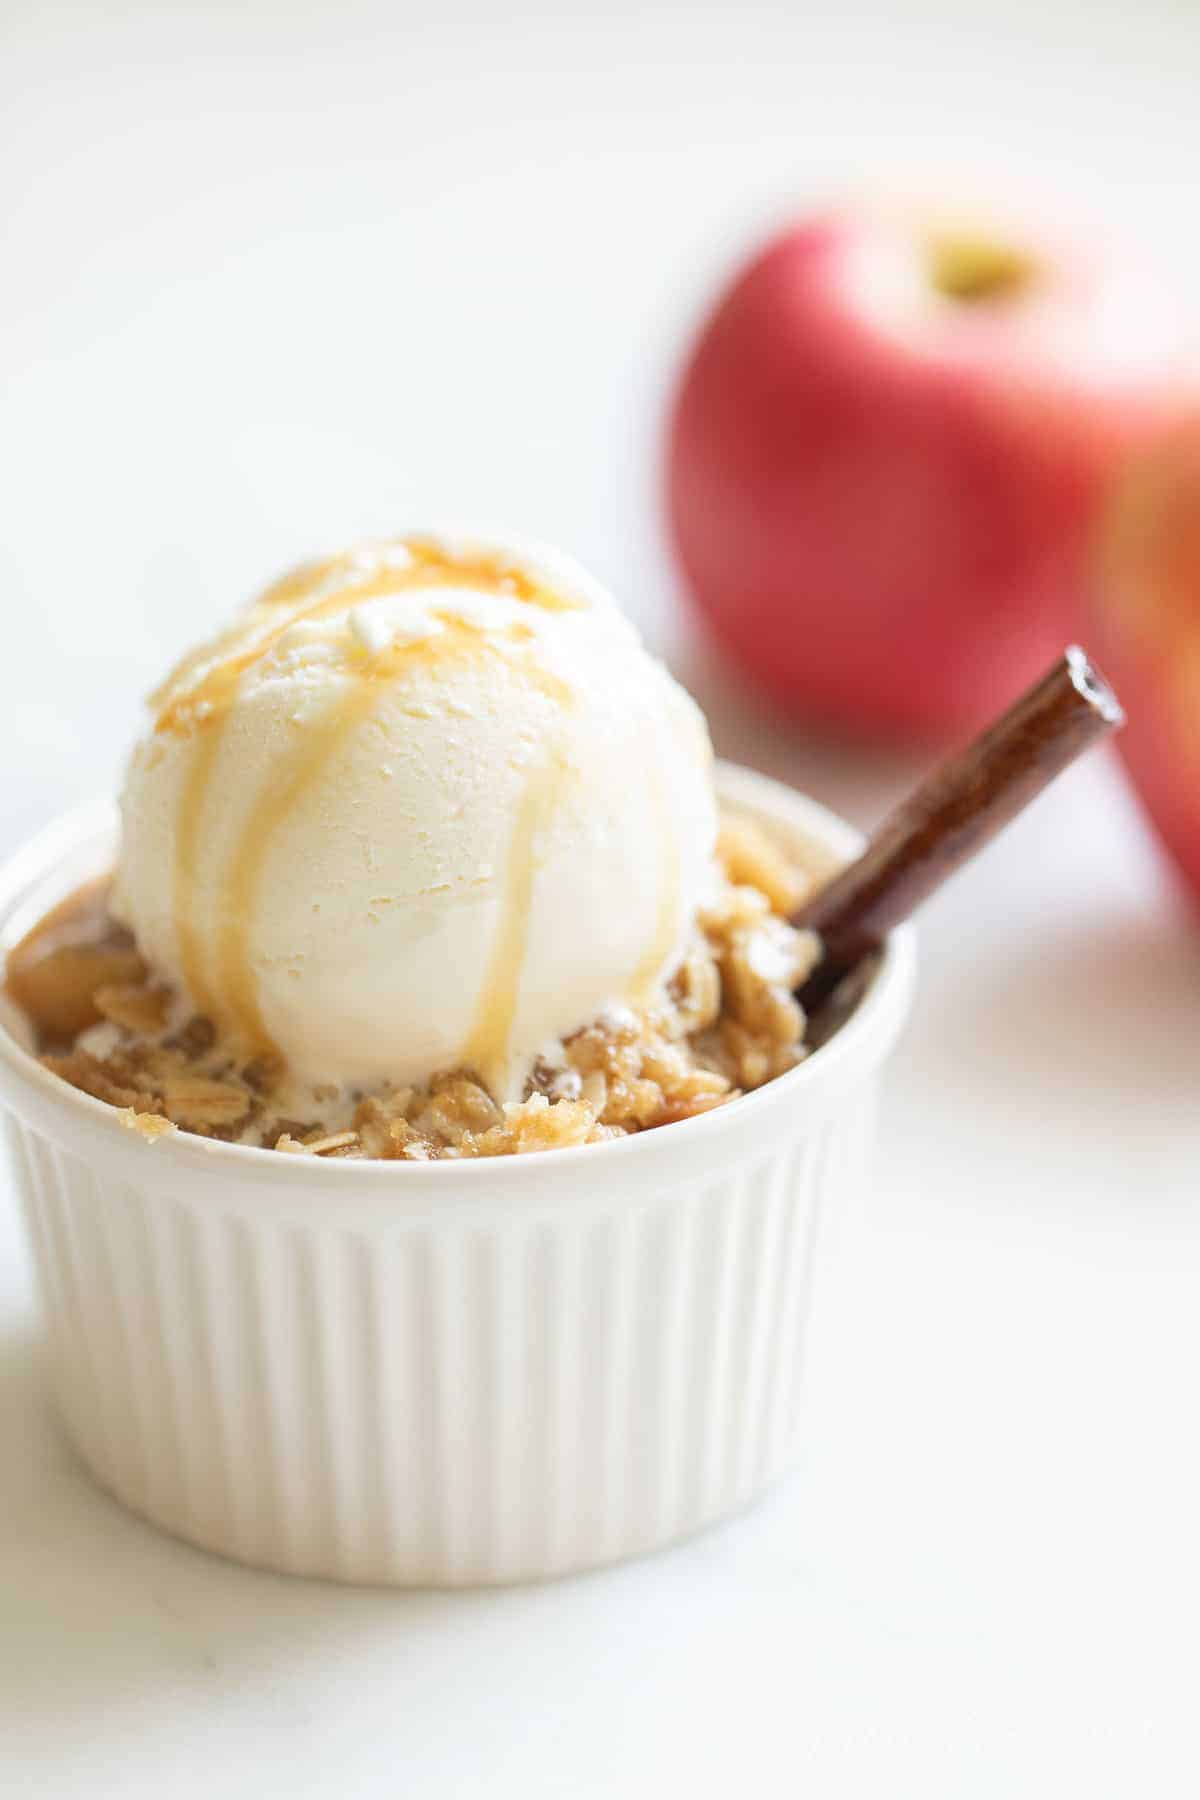 White surface with a small white ramiken of apple crisp, scoop of vanilla ice cream and caramel on top. apples in the background.